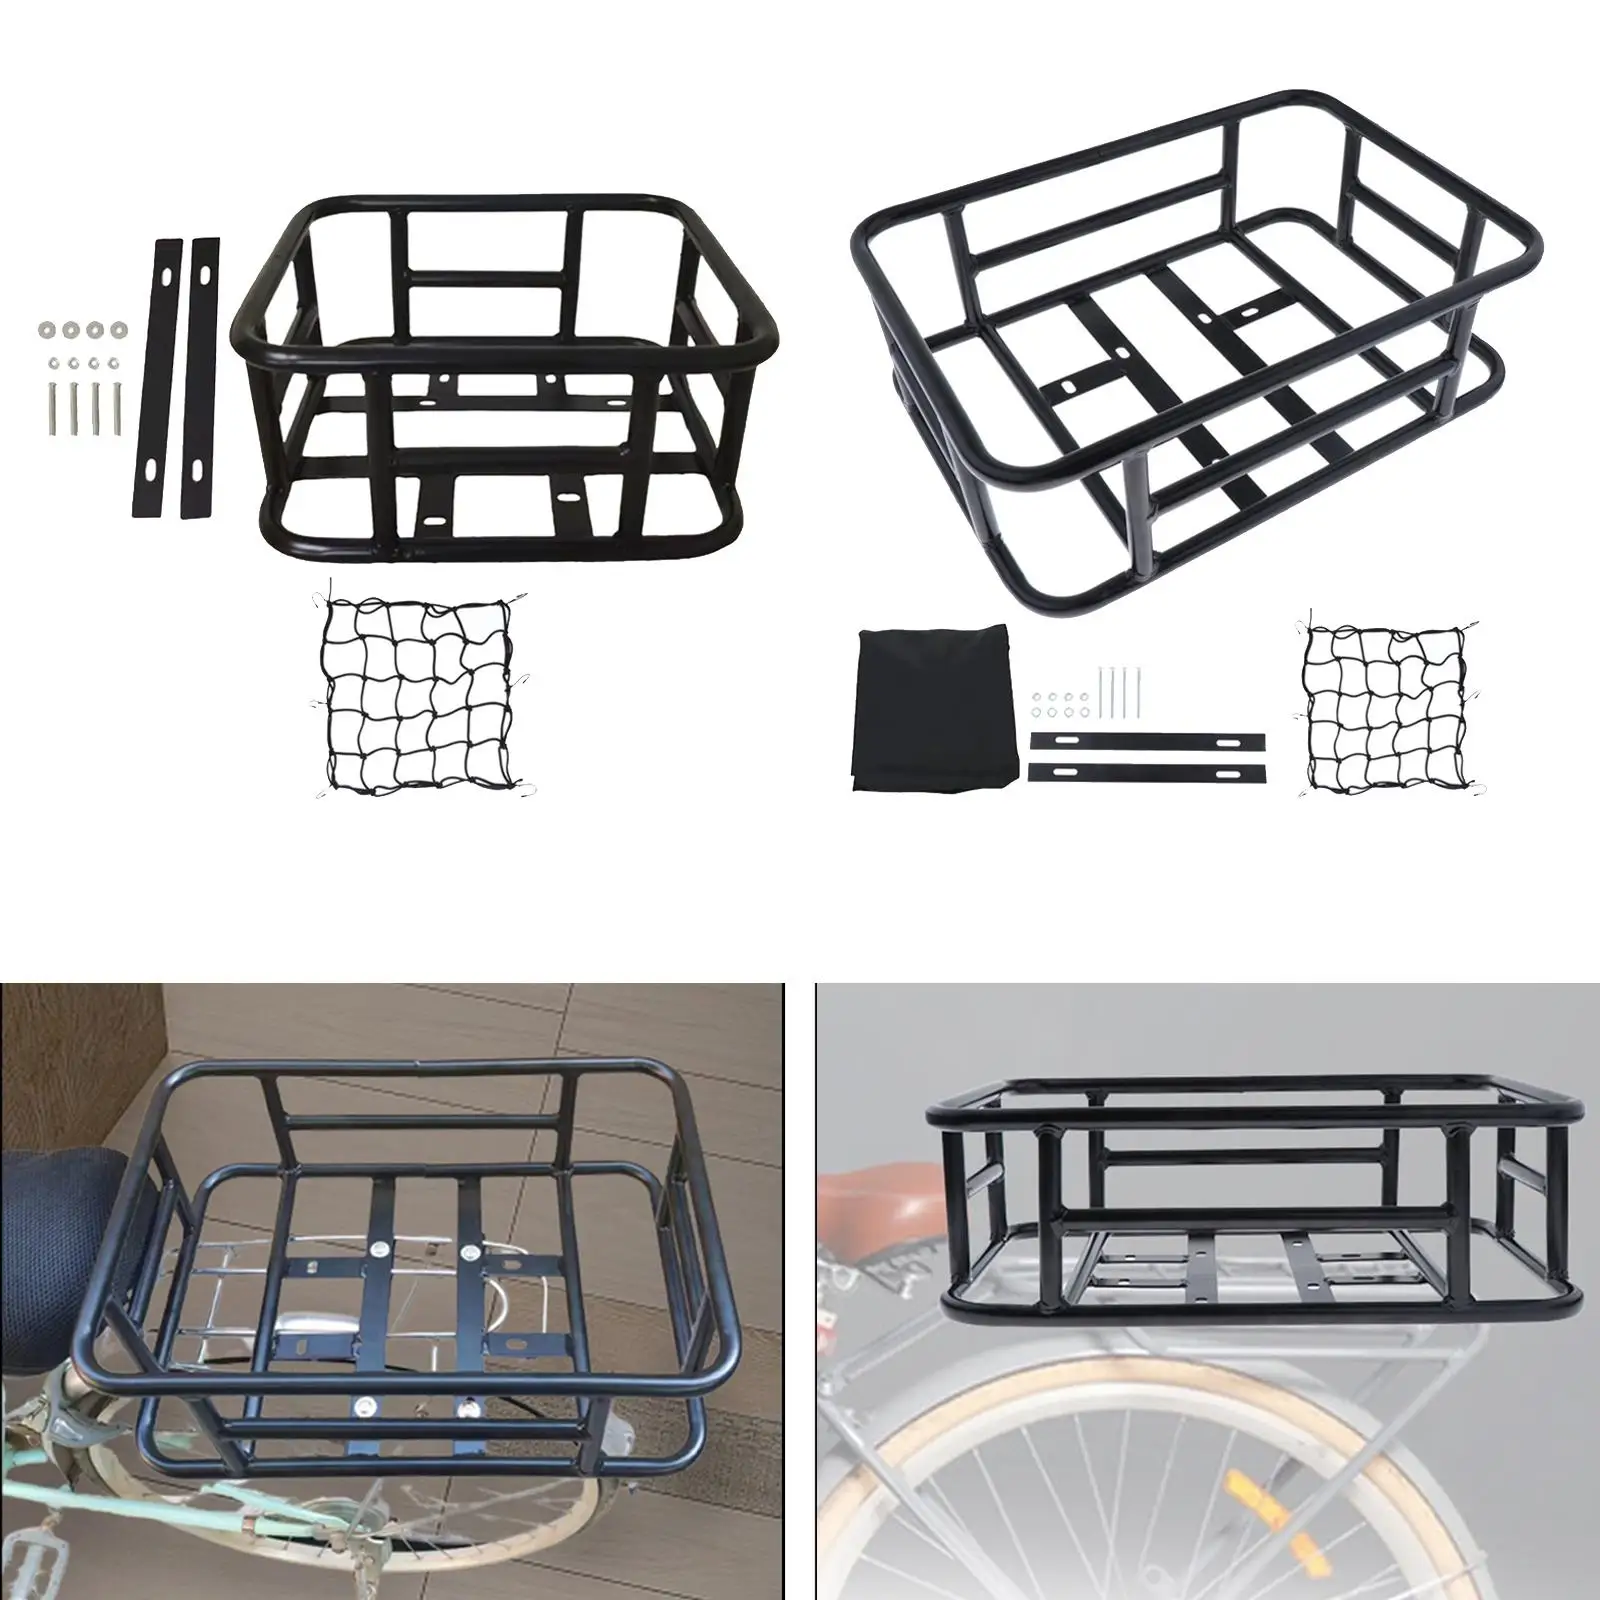 Rear Rack Bike Basket Bicycle Rear Cargo Rack Luggage Package Rack Iron Rear Bicycle Basket Pets Carrier for Shopping Luggage